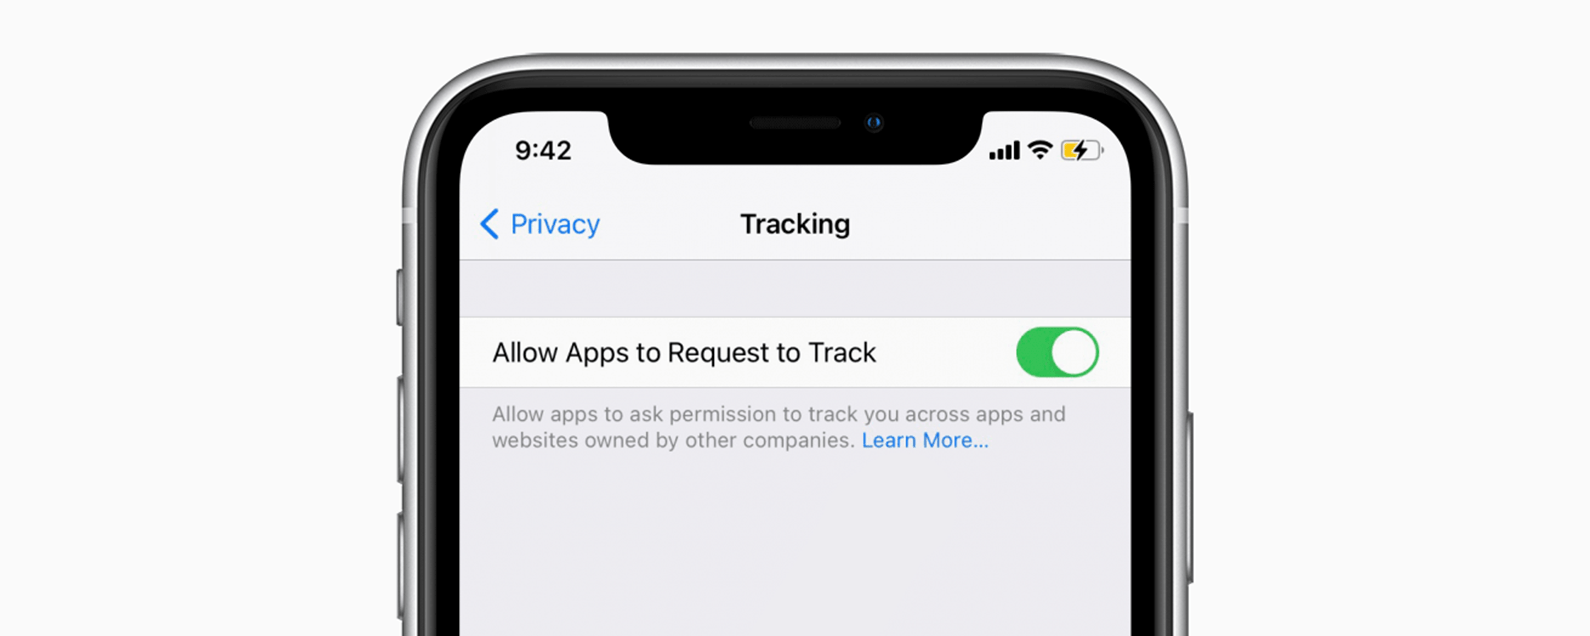 How to stop your iPhone from Tracking